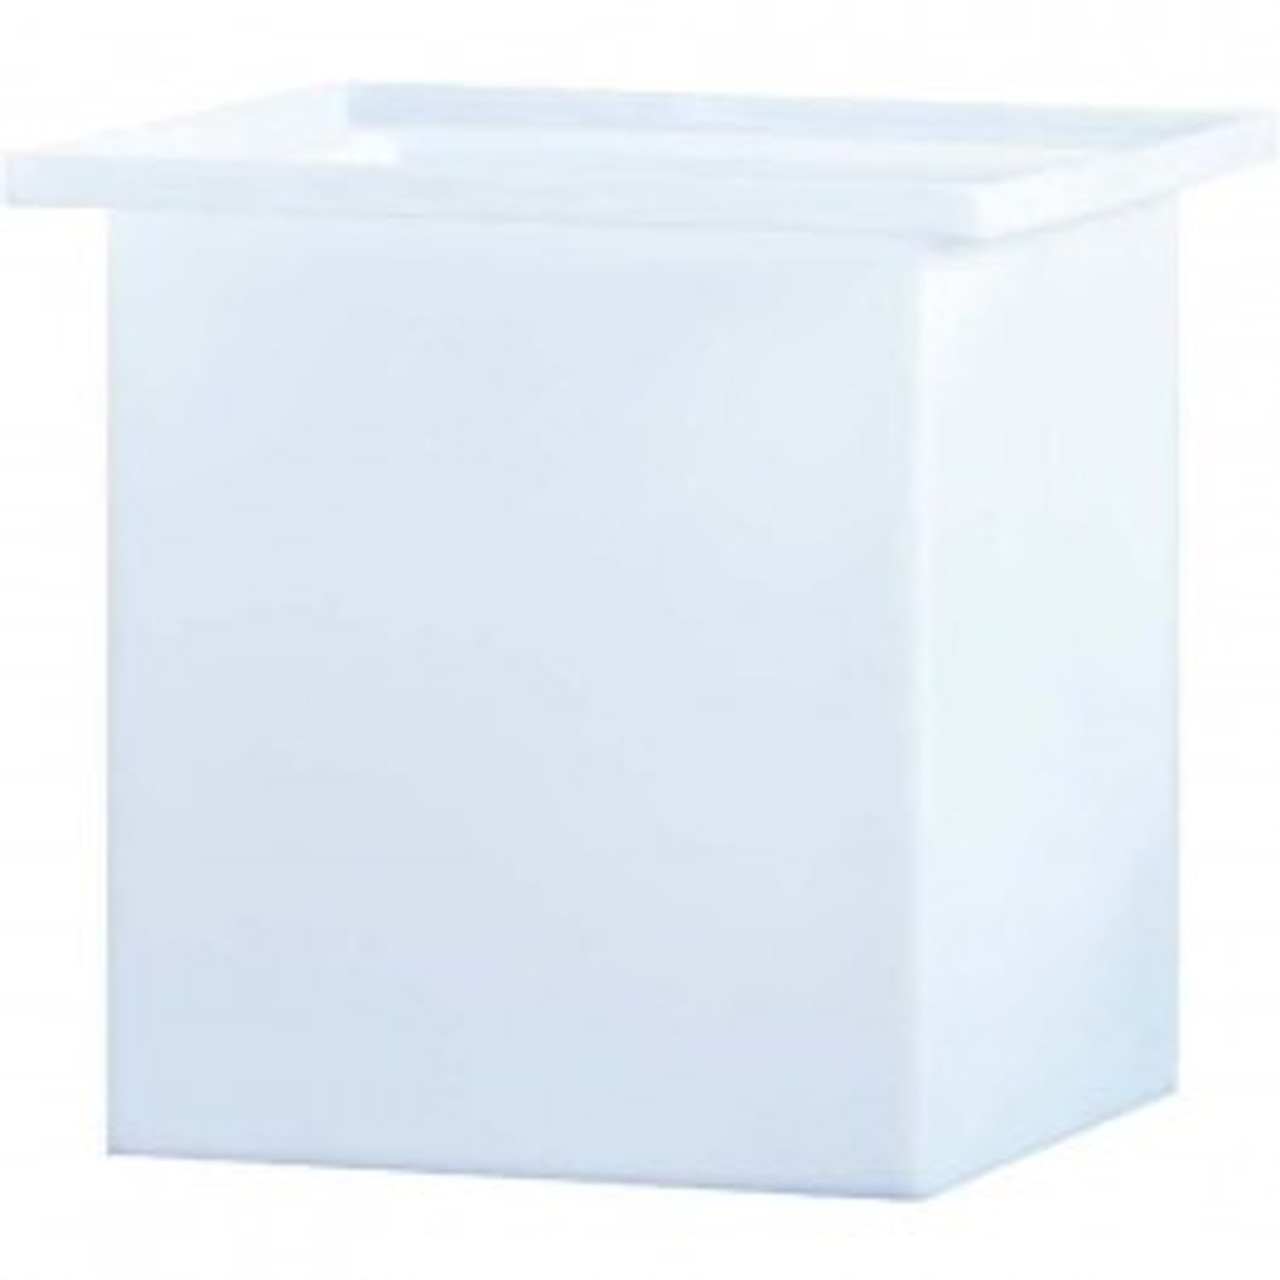 An image of a 1150 Gallon PE Chem-Tainer White Rectangular Open Top Tank | R727266A